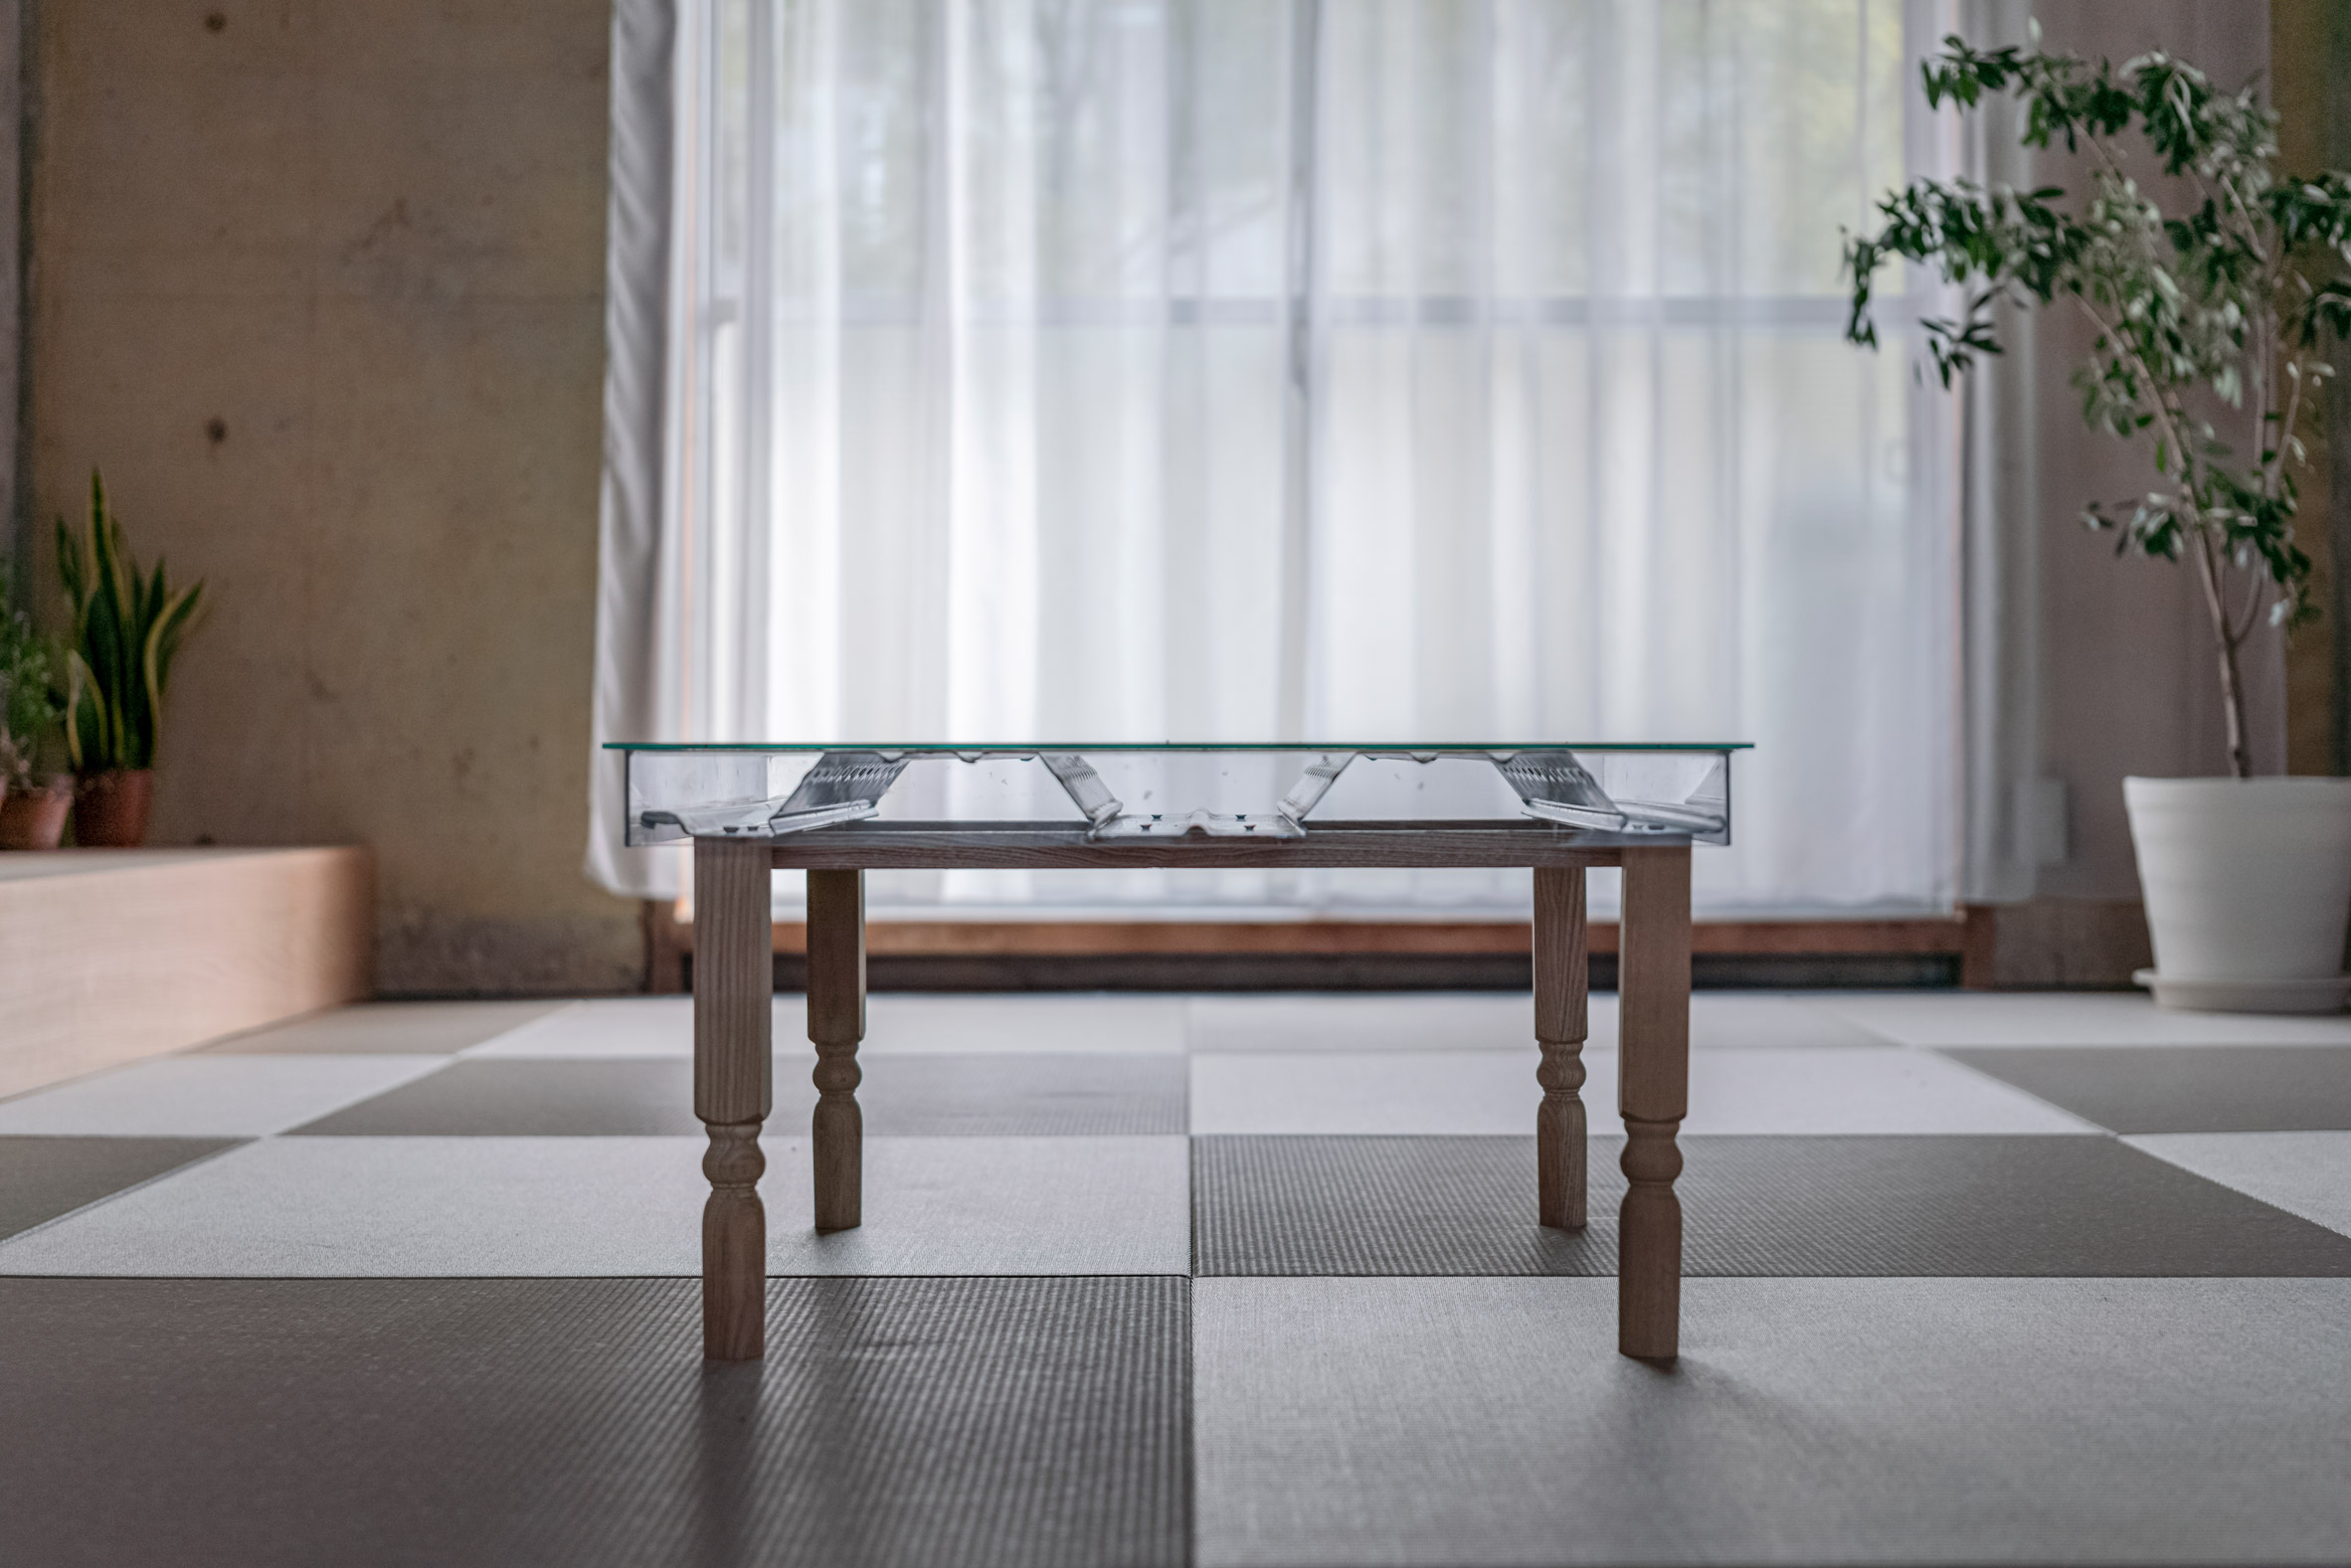 Table by Nanometer Architecture